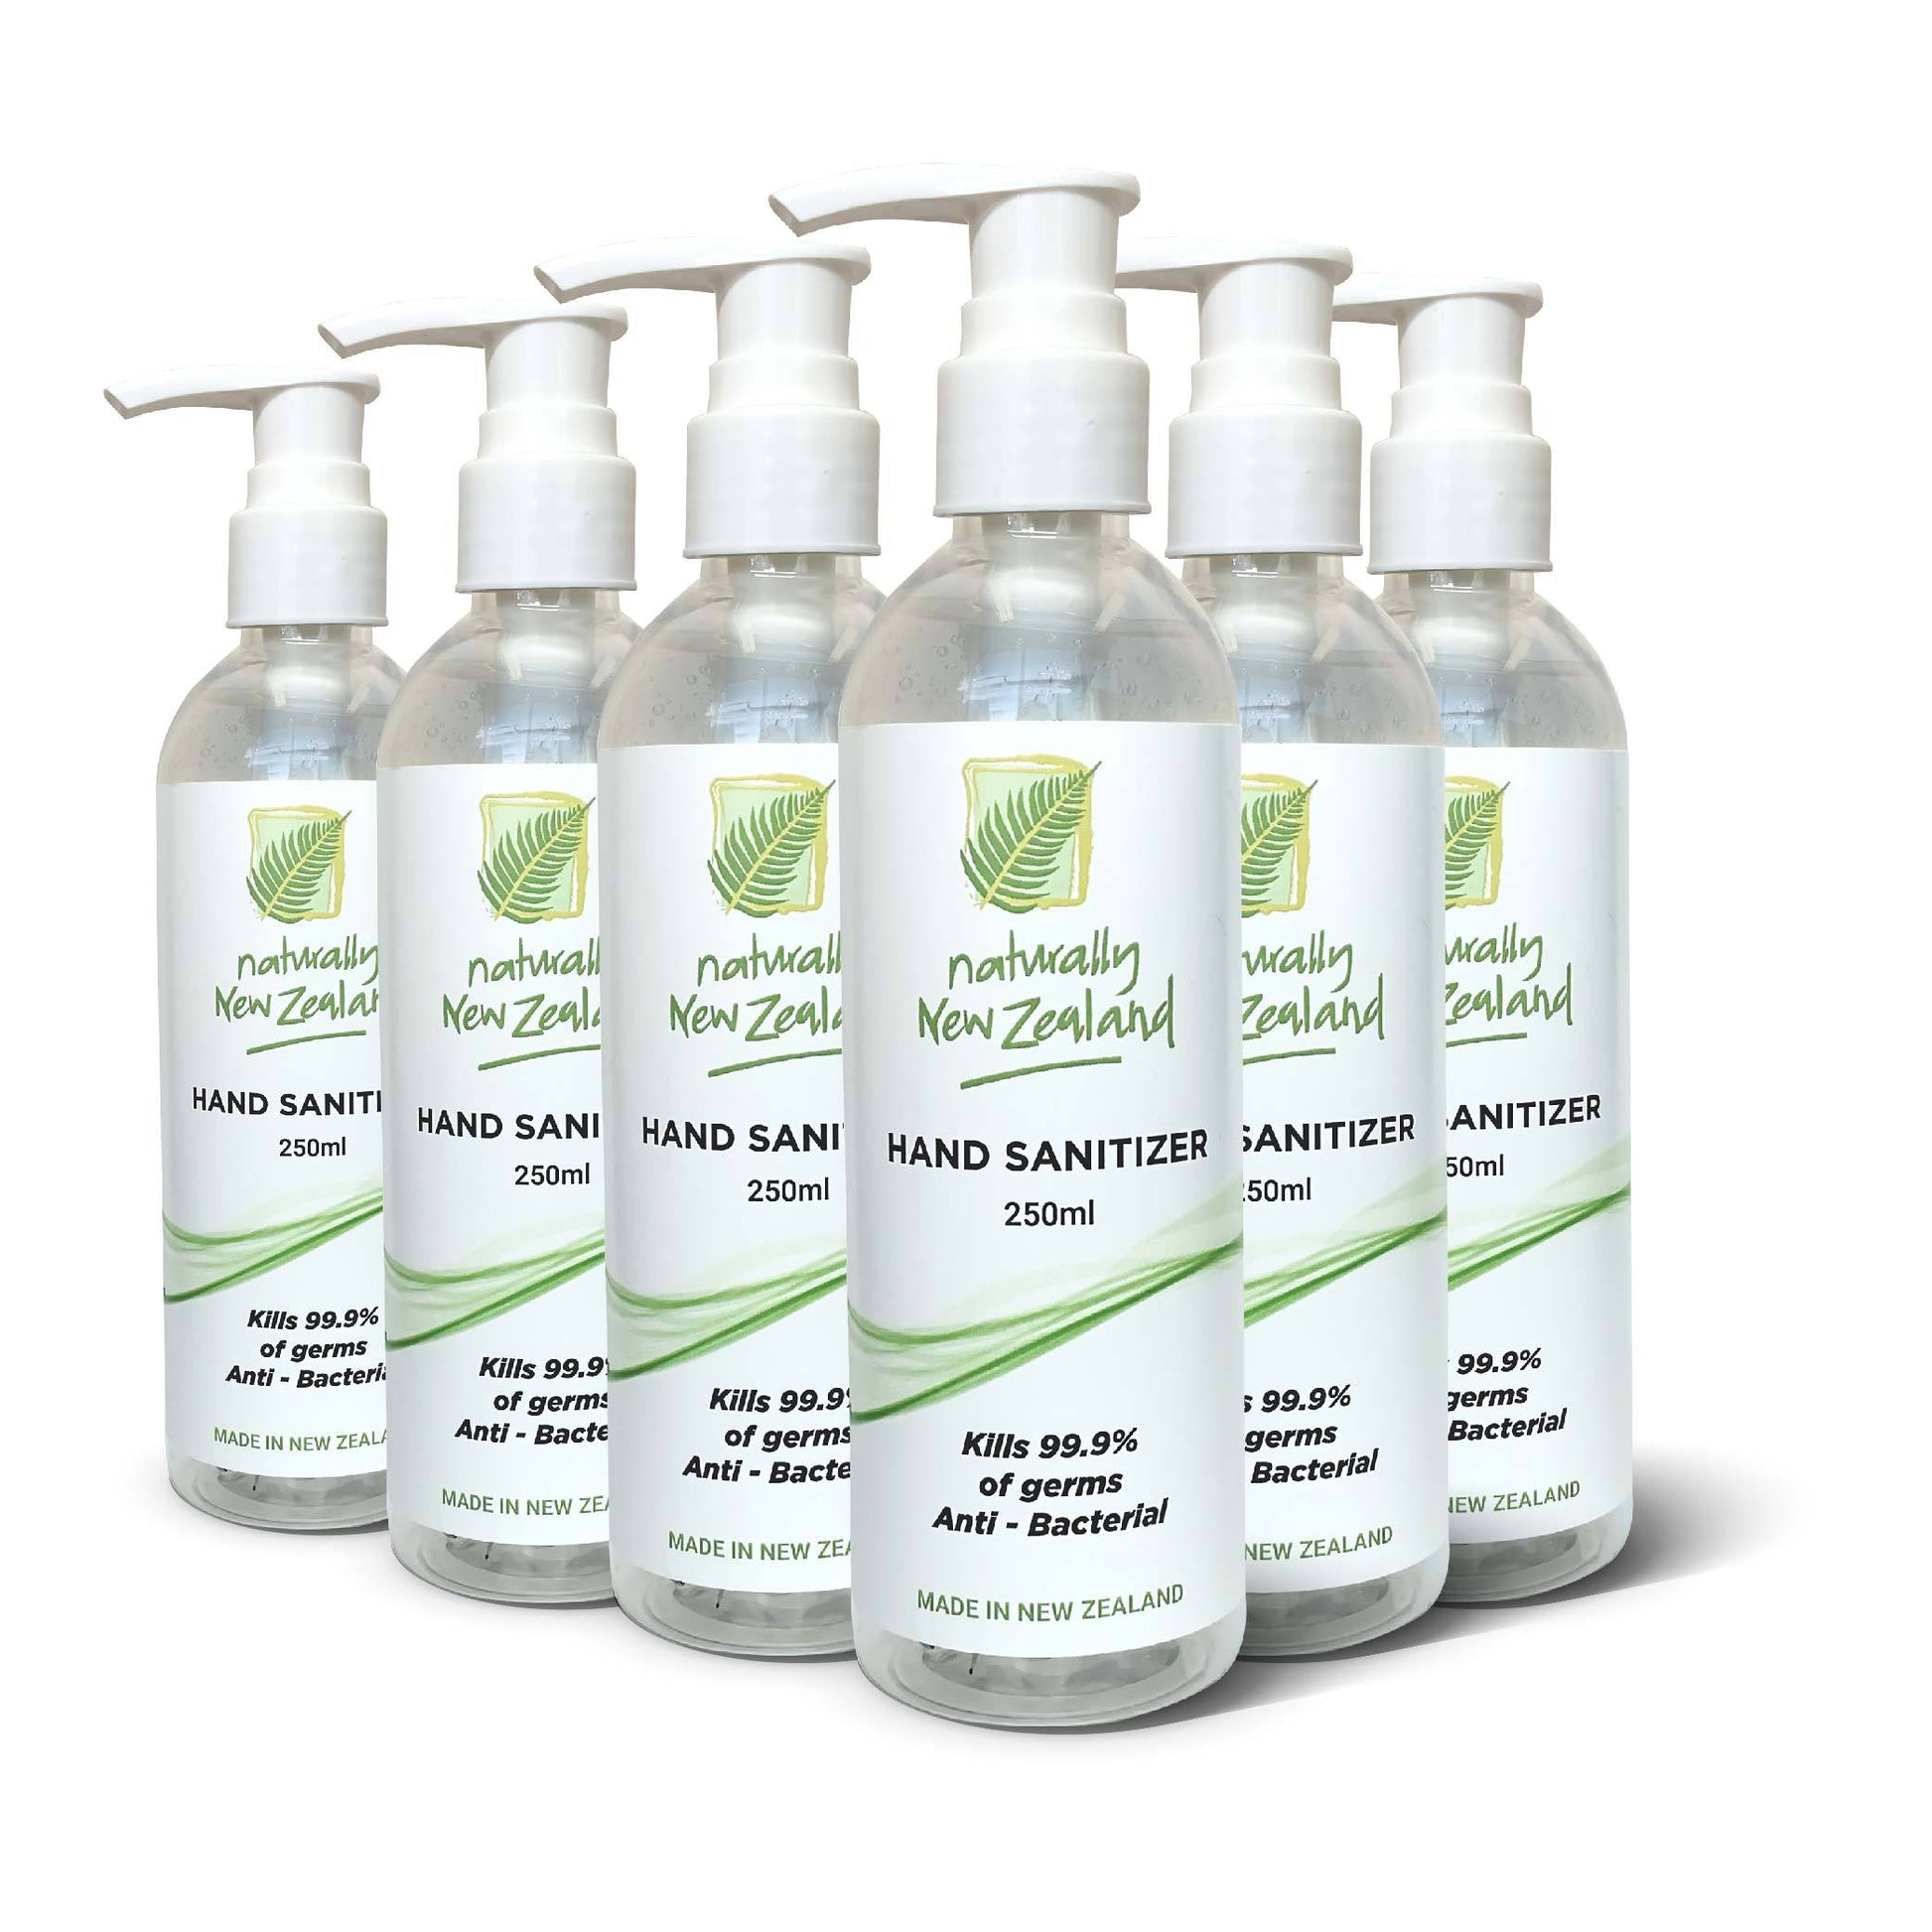 Naturally New Zealand Beauty - Body Care 6 PK Hand Sanitizer - Naturally New Zealand  250ml - North Island Delivery (excl. Auckland)